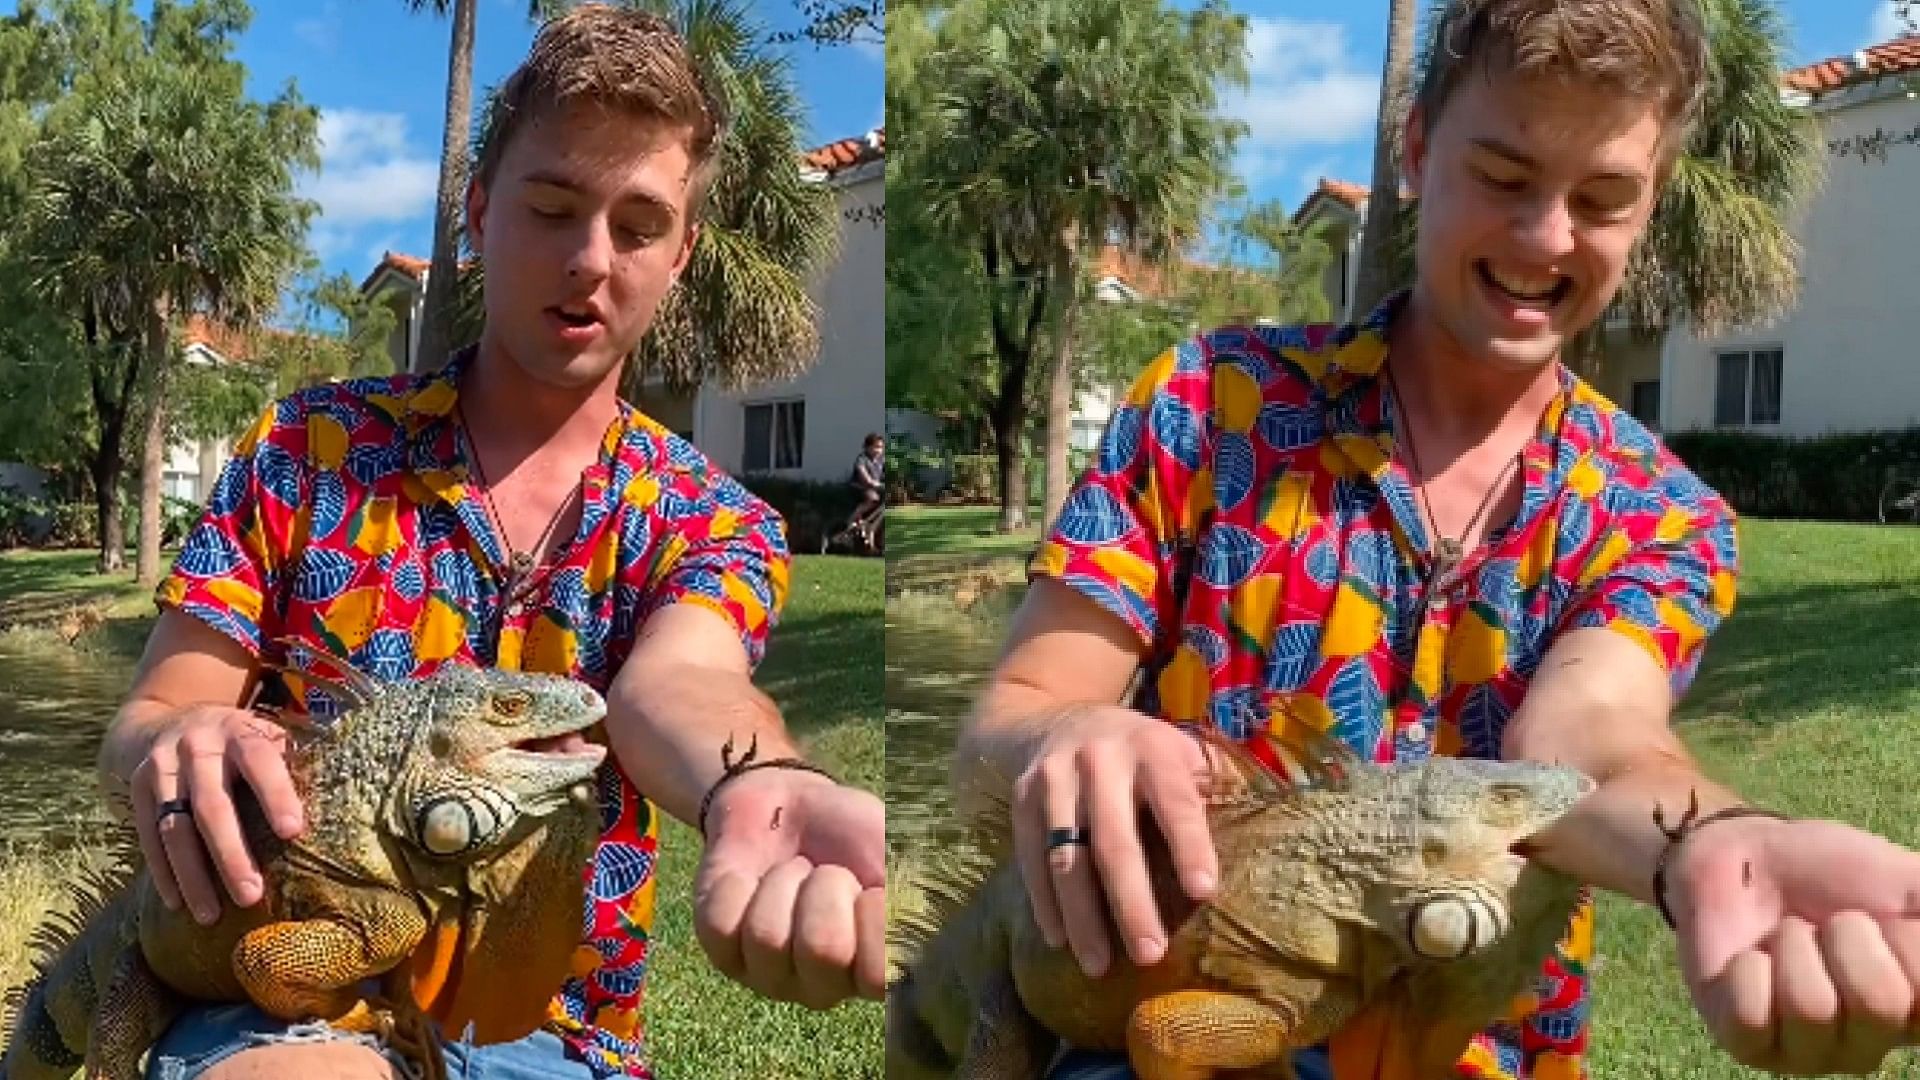 Blogger Hold Iguana In Arms And Latter Grabbed And Bit His Hand Watch Viral Video